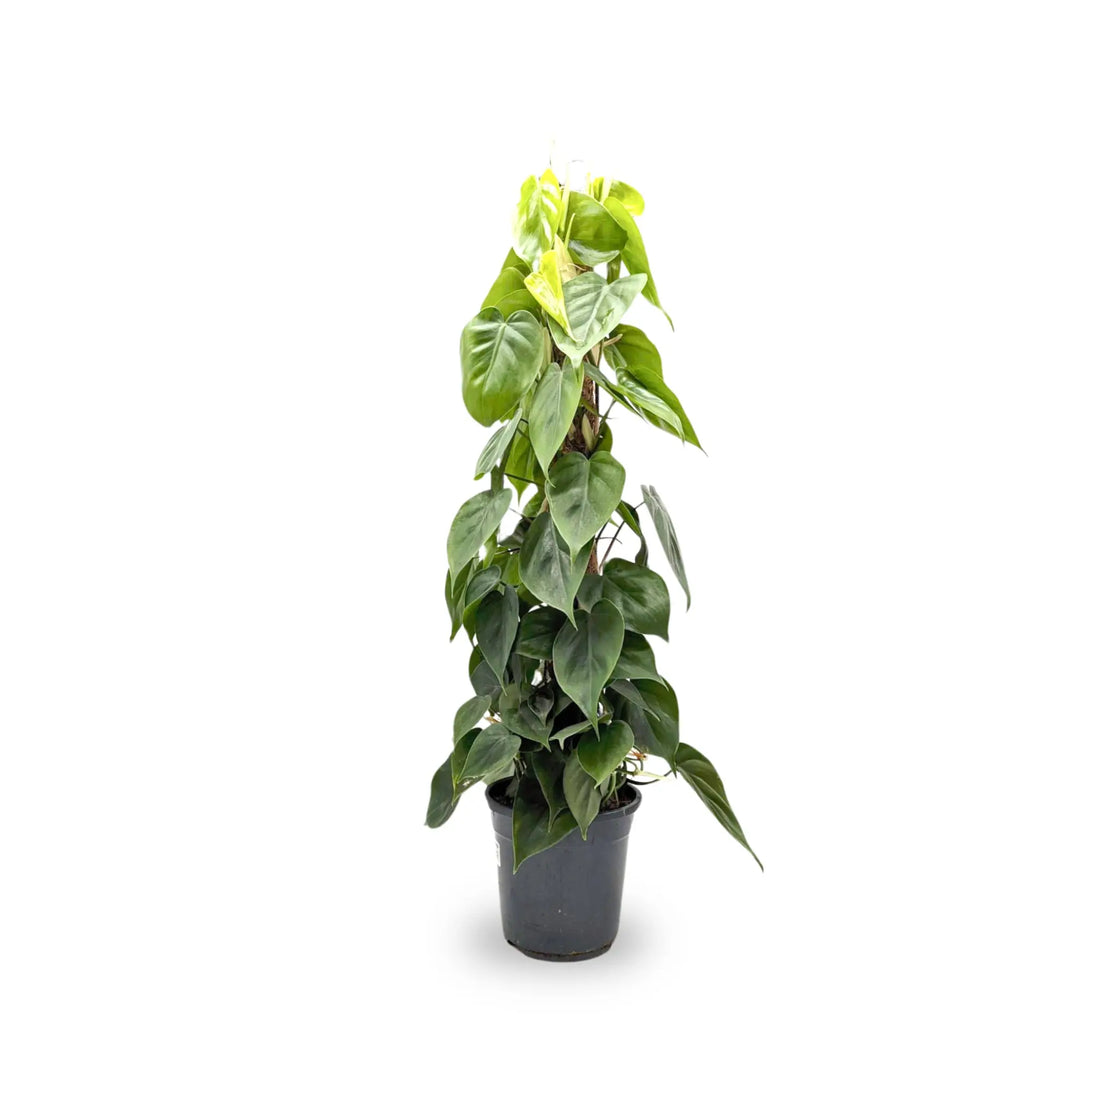 Philodendron scandens - Sweetheart plant Oz